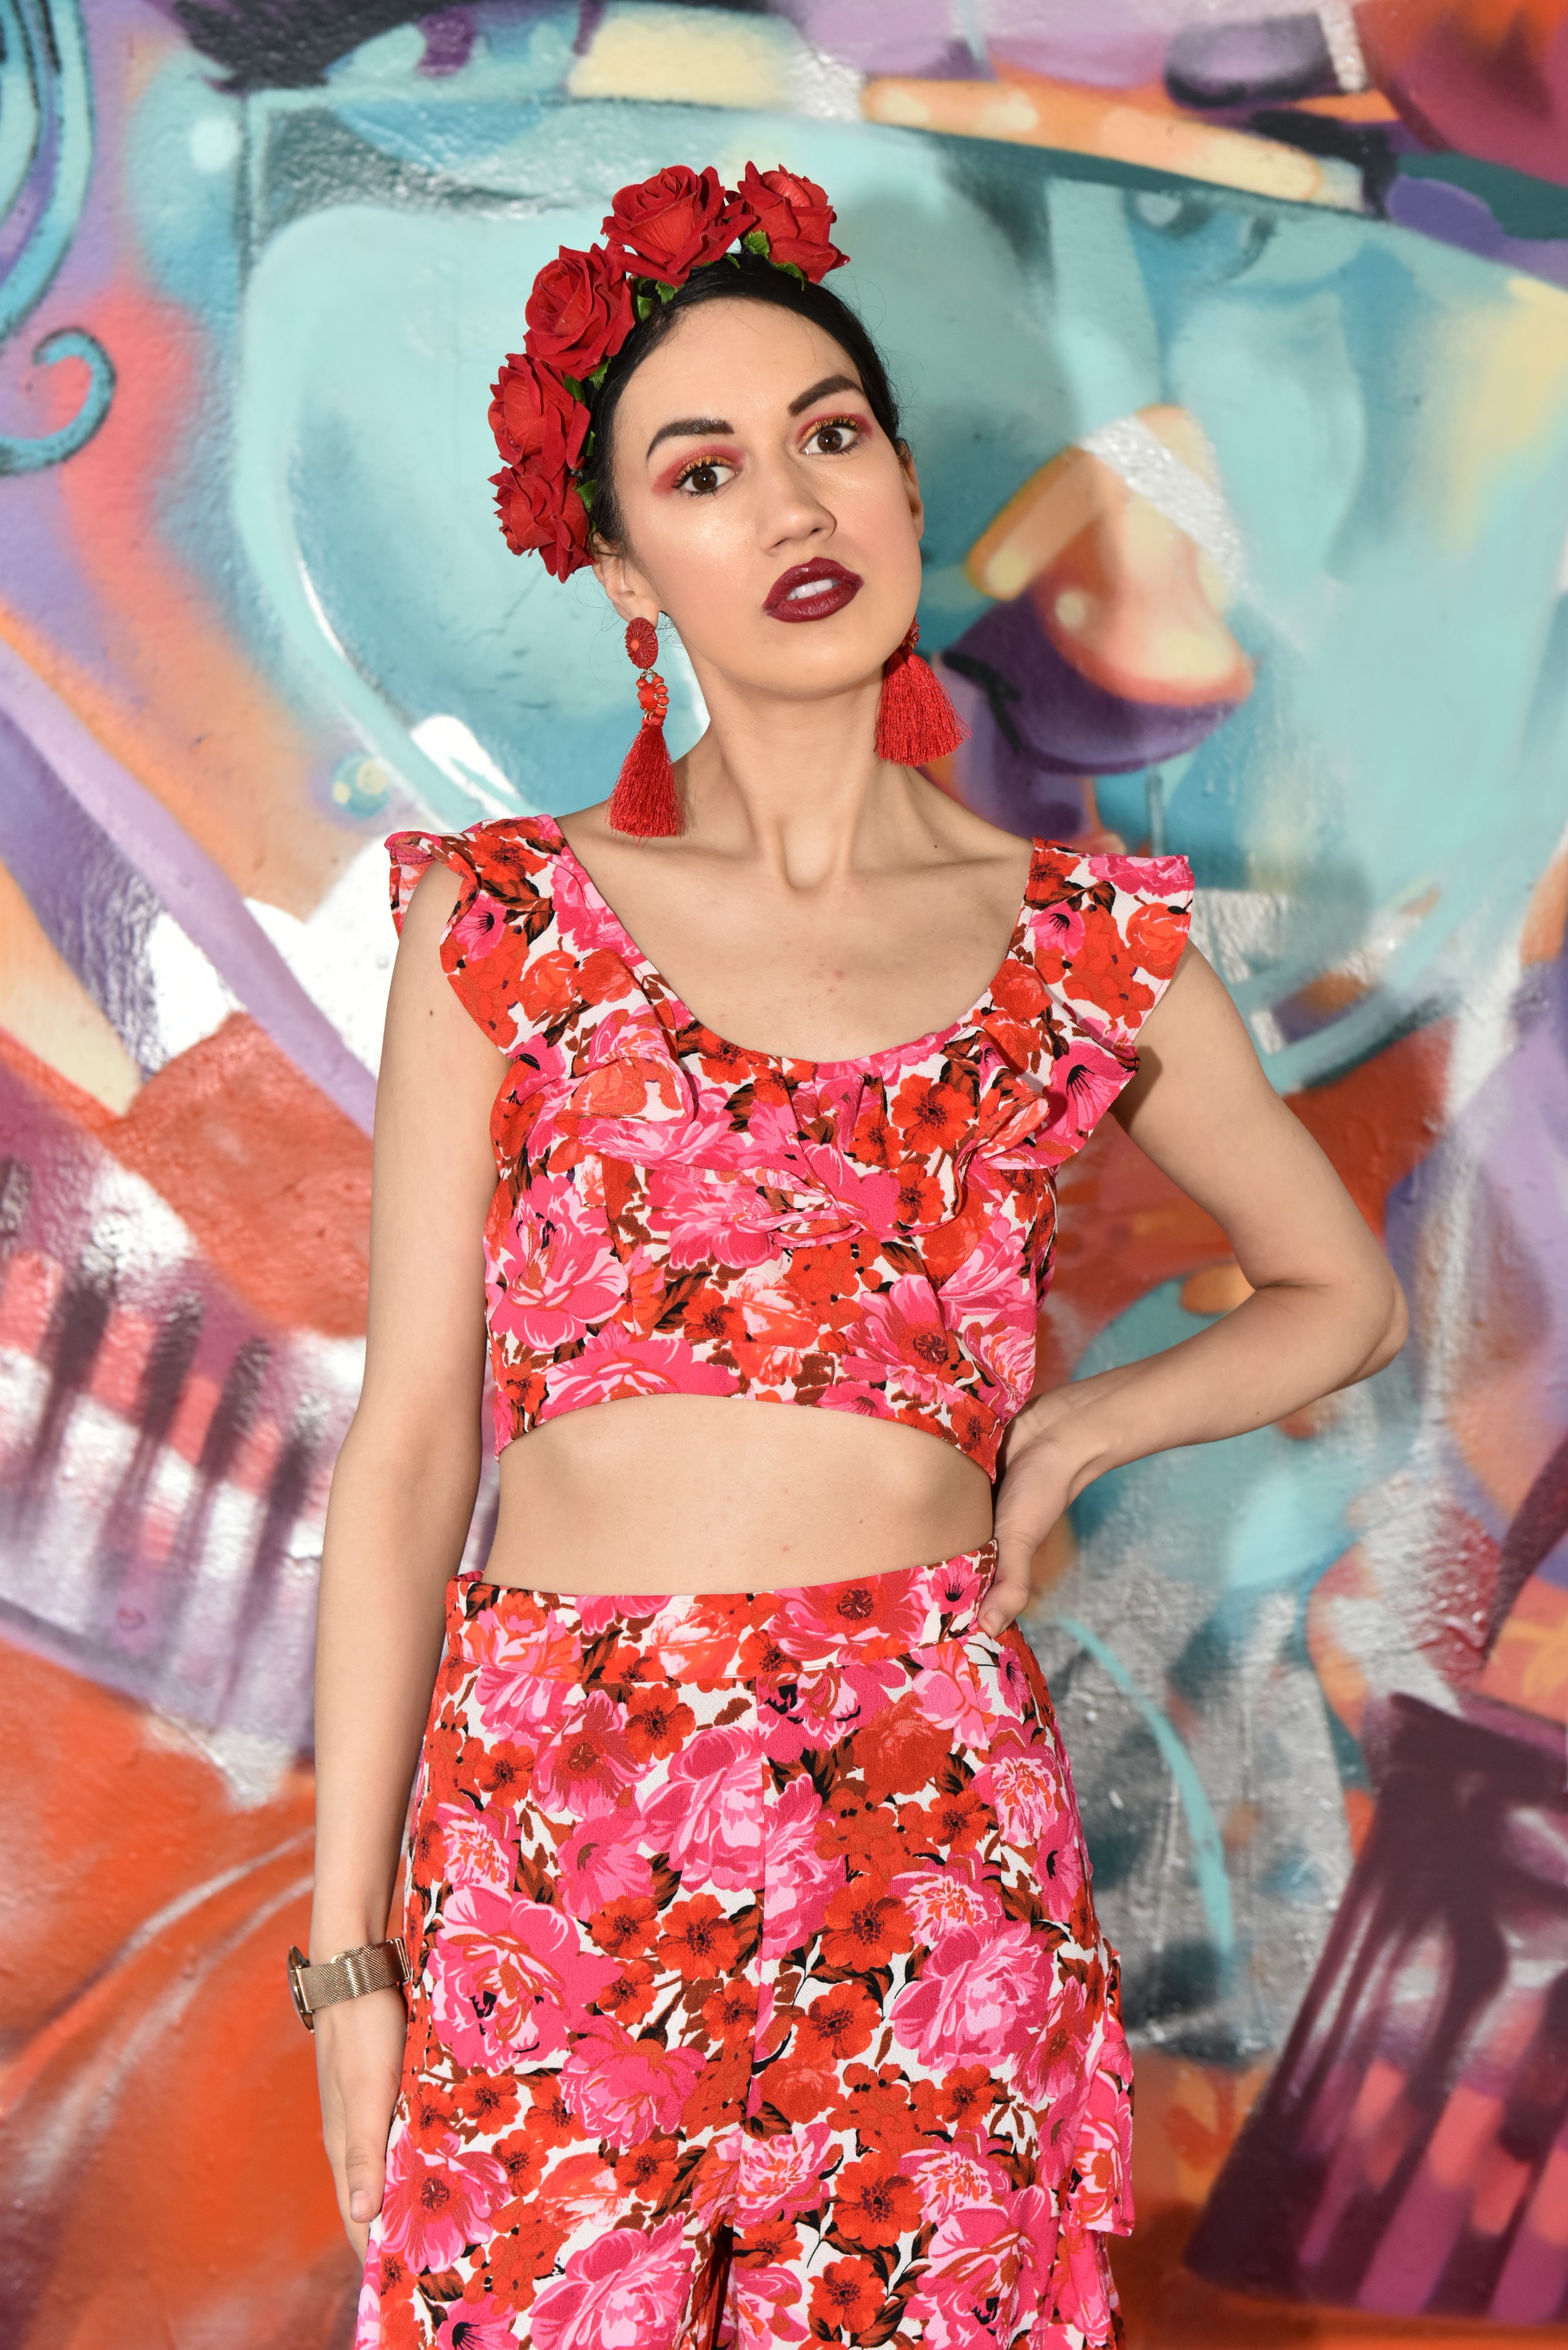 <img src="ana.jpg" alt="ana floral top and trousers casual dating"/> 